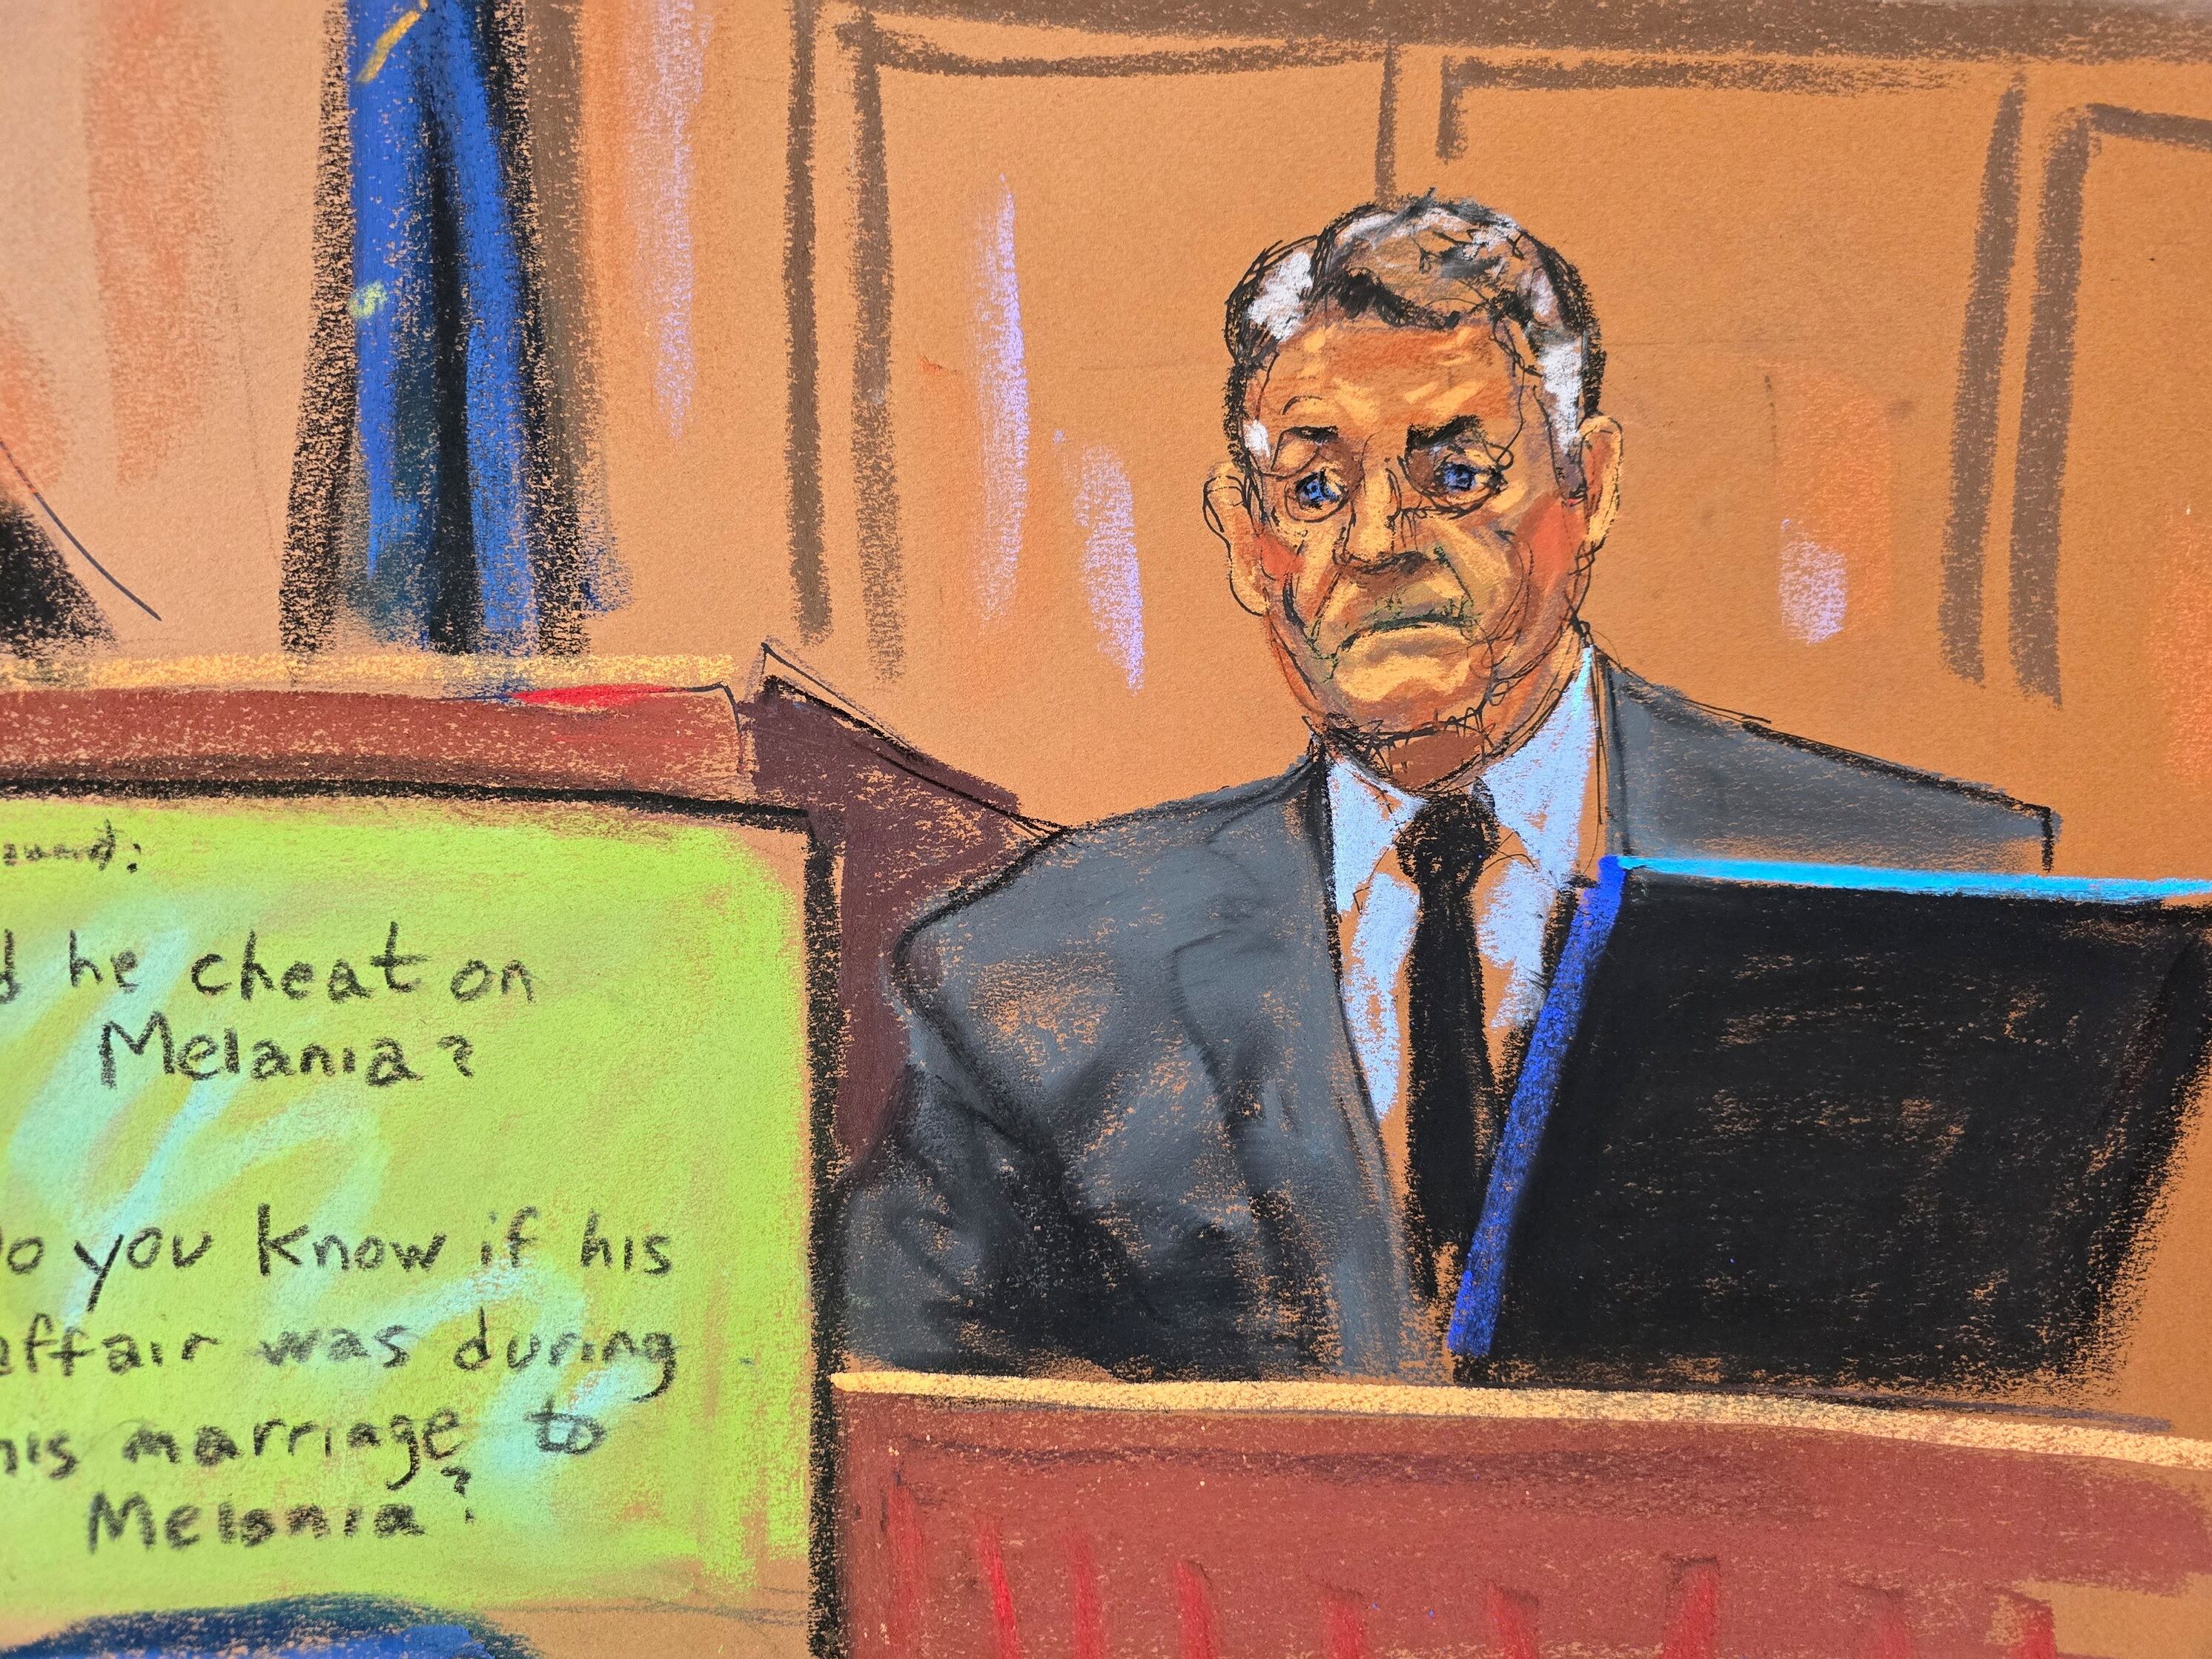 Lawyer Keith Davidson, who represented former Playboy model Karen McDougal, testified during Trump's criminal trial on charges that he falsified business records in Manhattan state court in New York City, U.S. April 30 in this courtroom sketch.